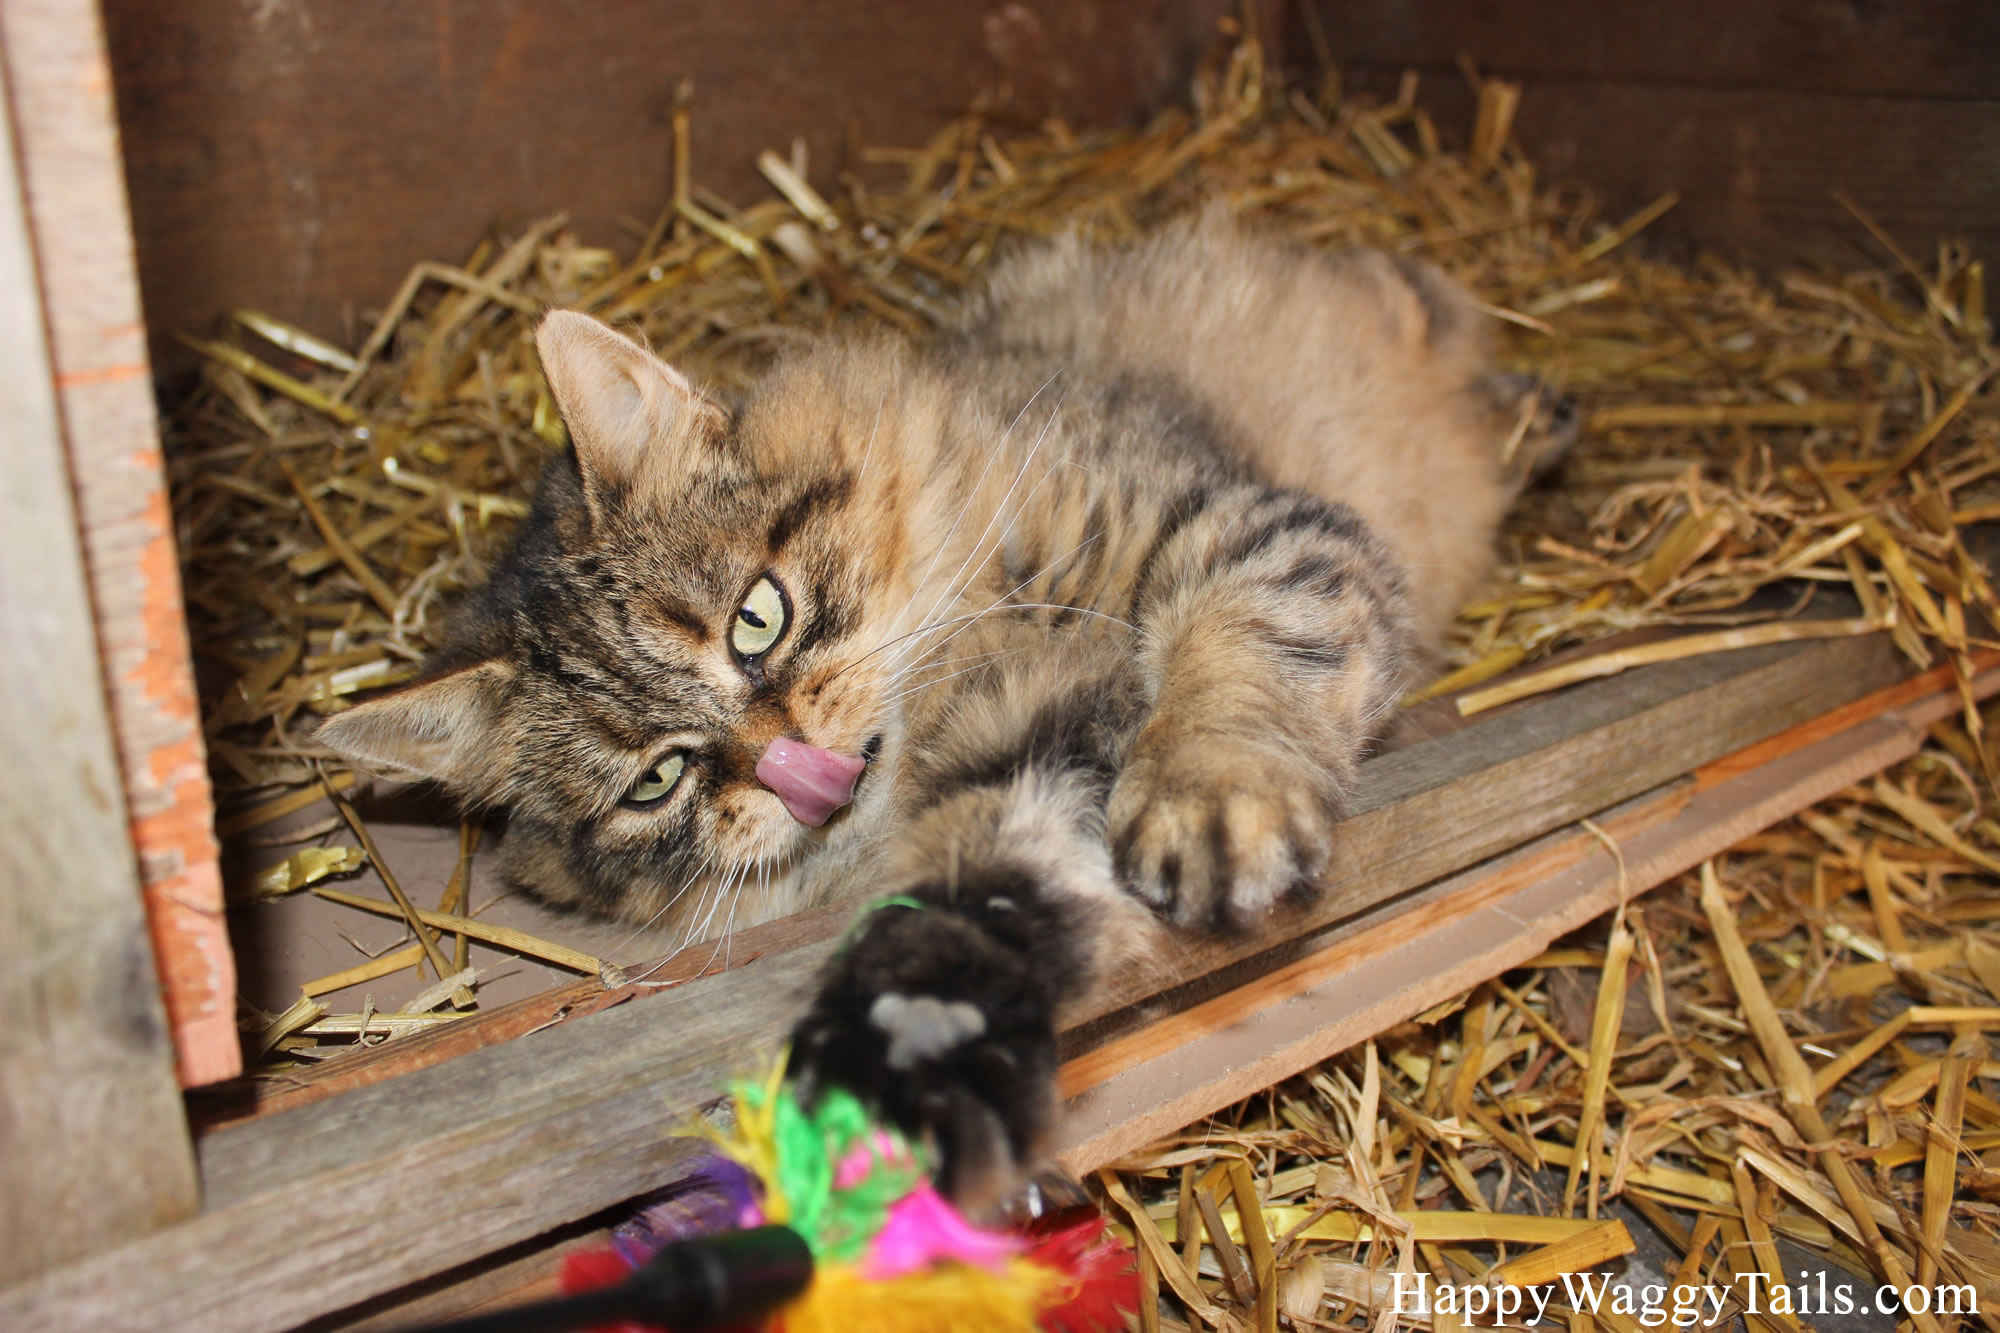 Bobbie playing with a feather chase toy in the cat enclosure.